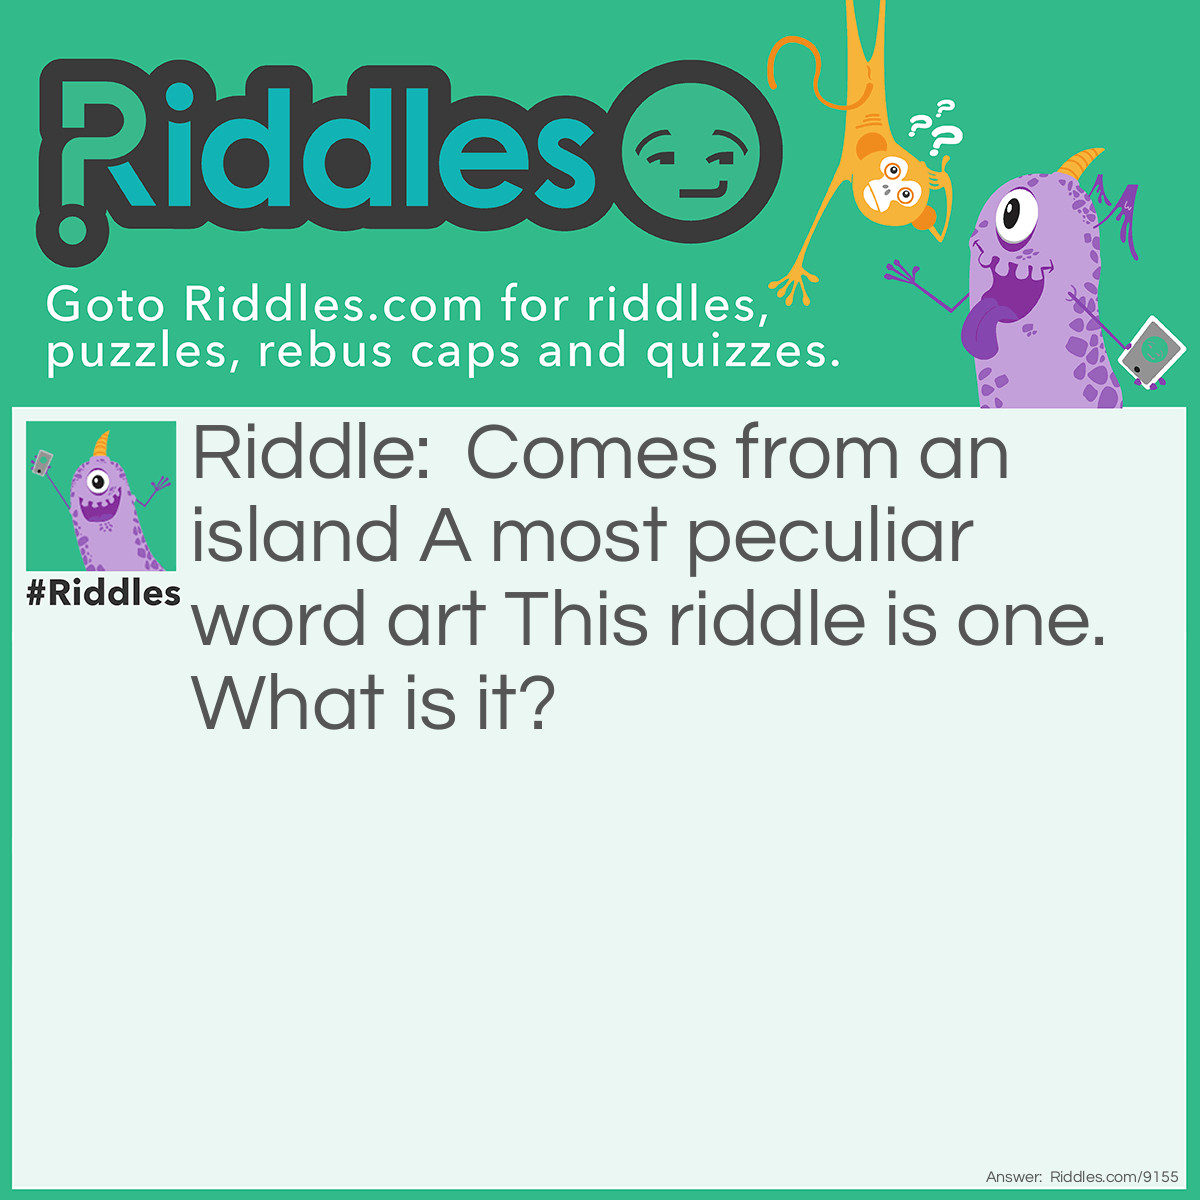 Riddle: Comes from an island A most peculiar word art This riddle is one. What is it? Answer: Haiku.